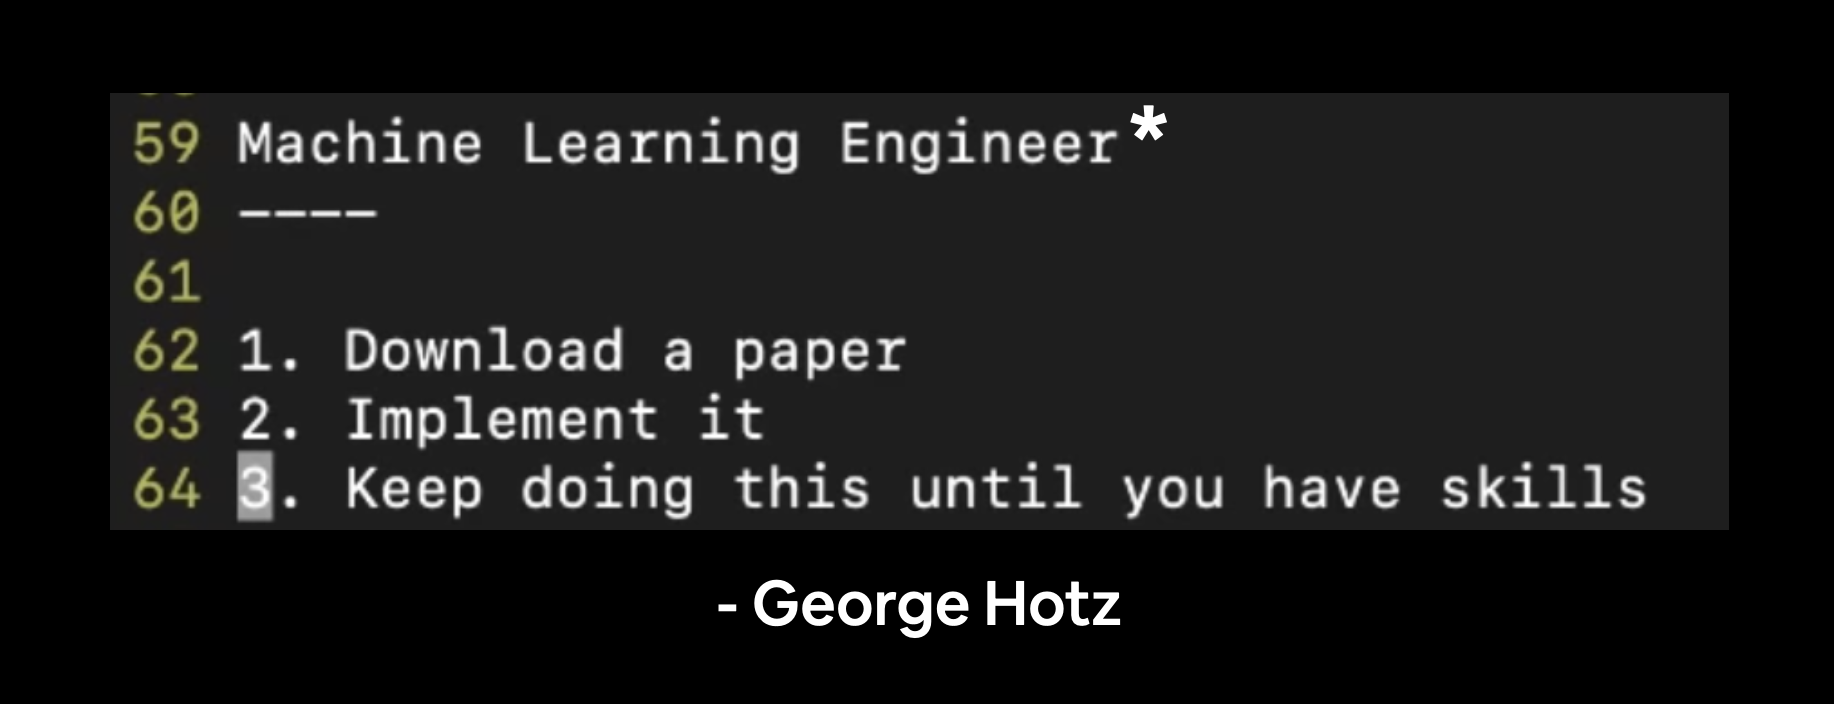 george hotz quote saying to get better at being a machine learning engineer, download a paper, implement it and keep going until you have skills